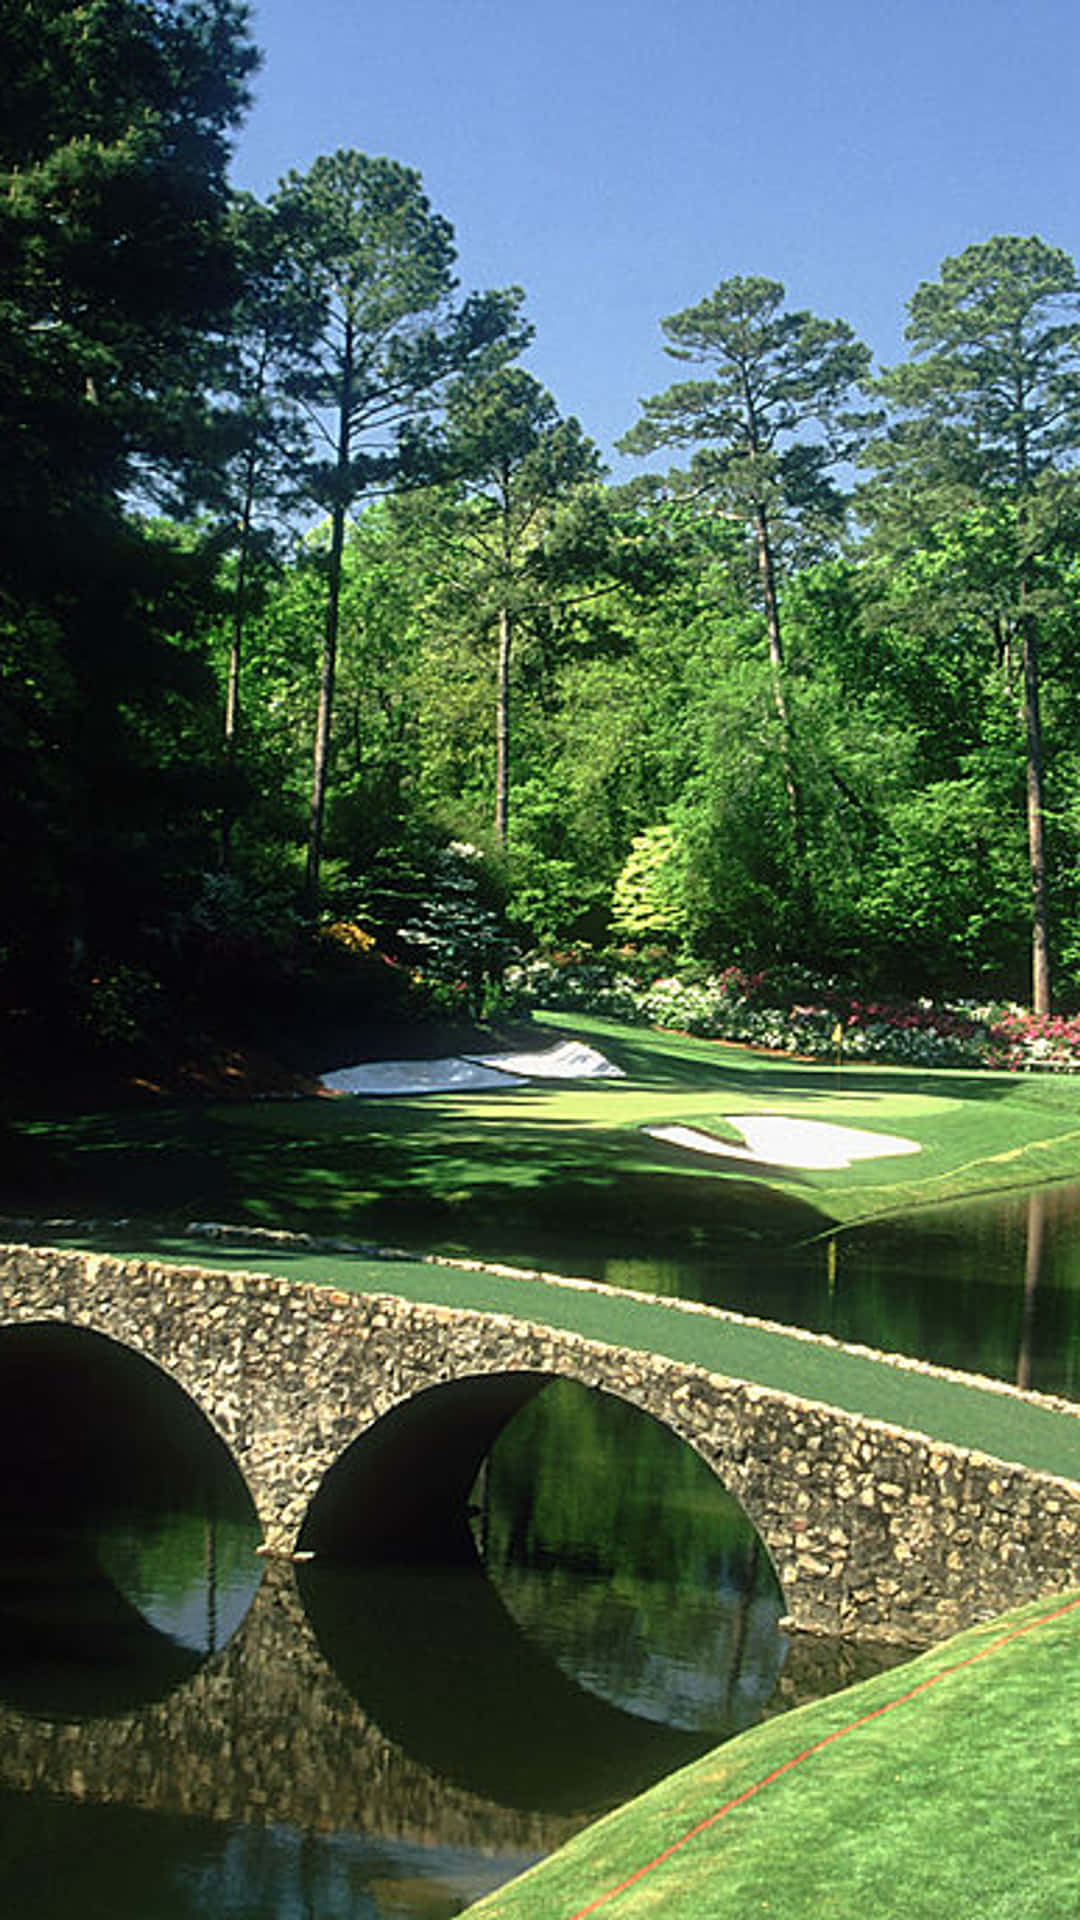 Take in the beauty and tranquillity of Augusta National Golf Course on your iPhone. Wallpaper